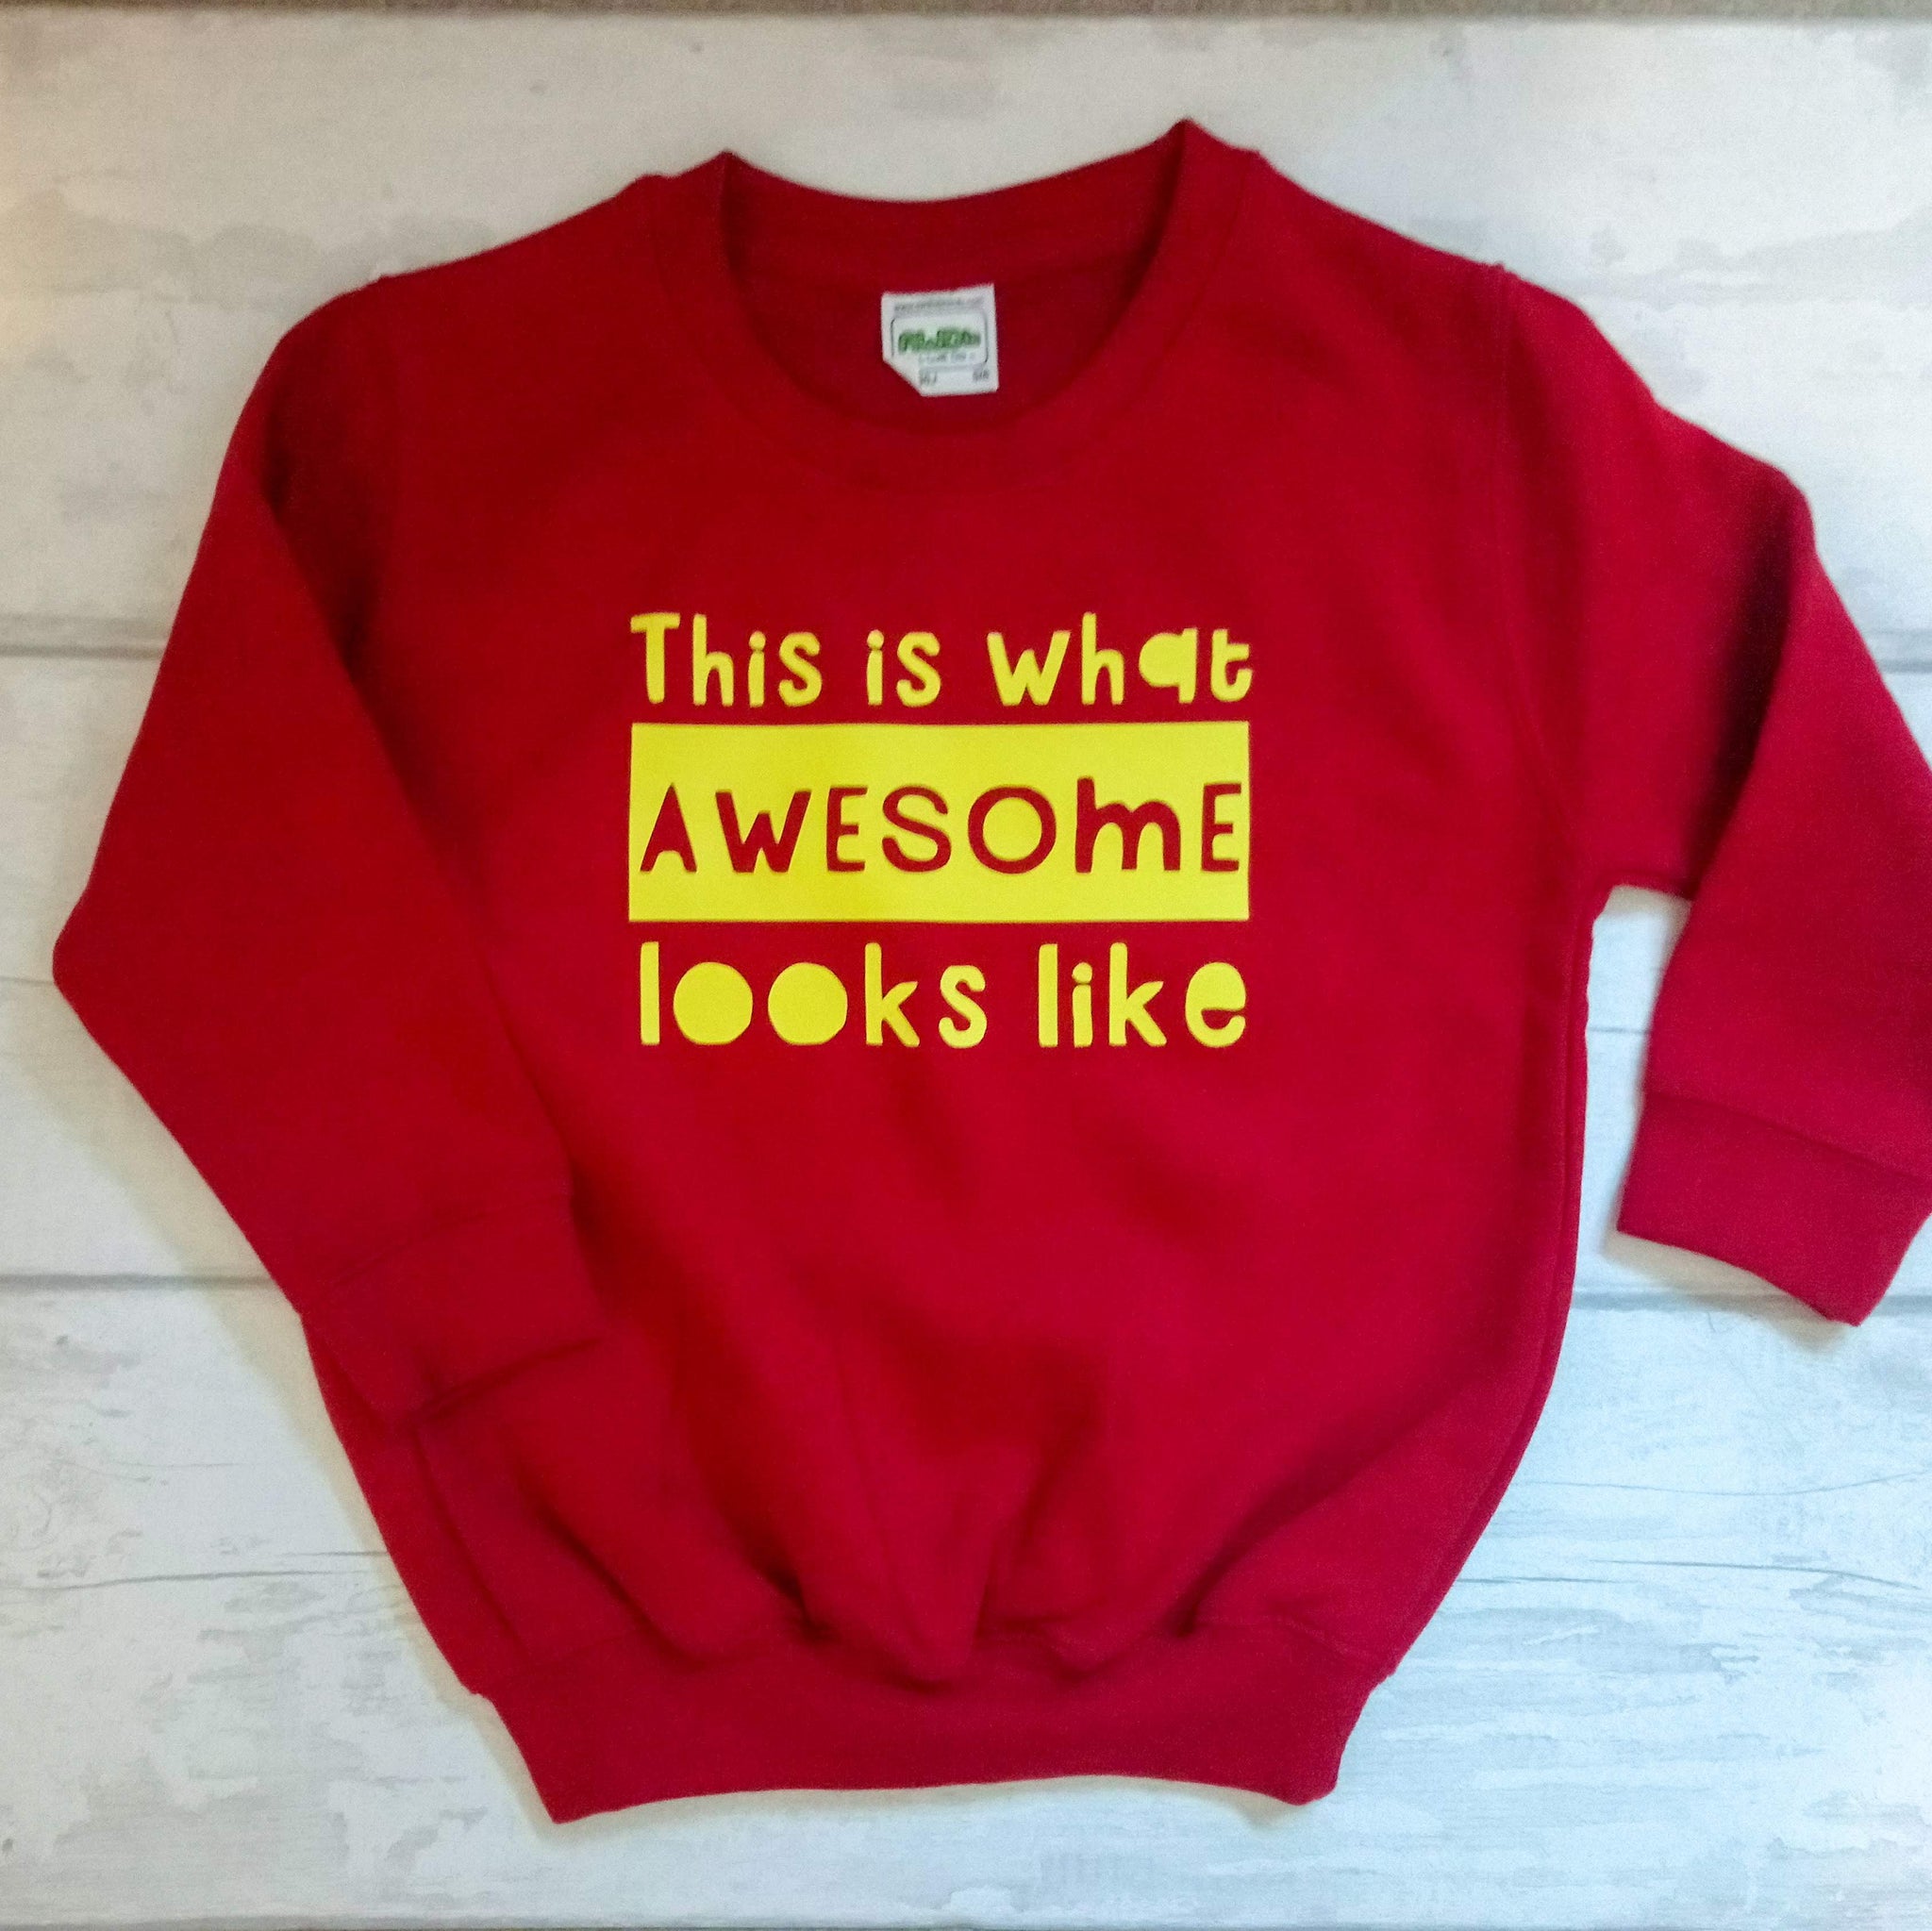 Mega cute "This is what awesome looks like" unisex kids children's sweatshirt